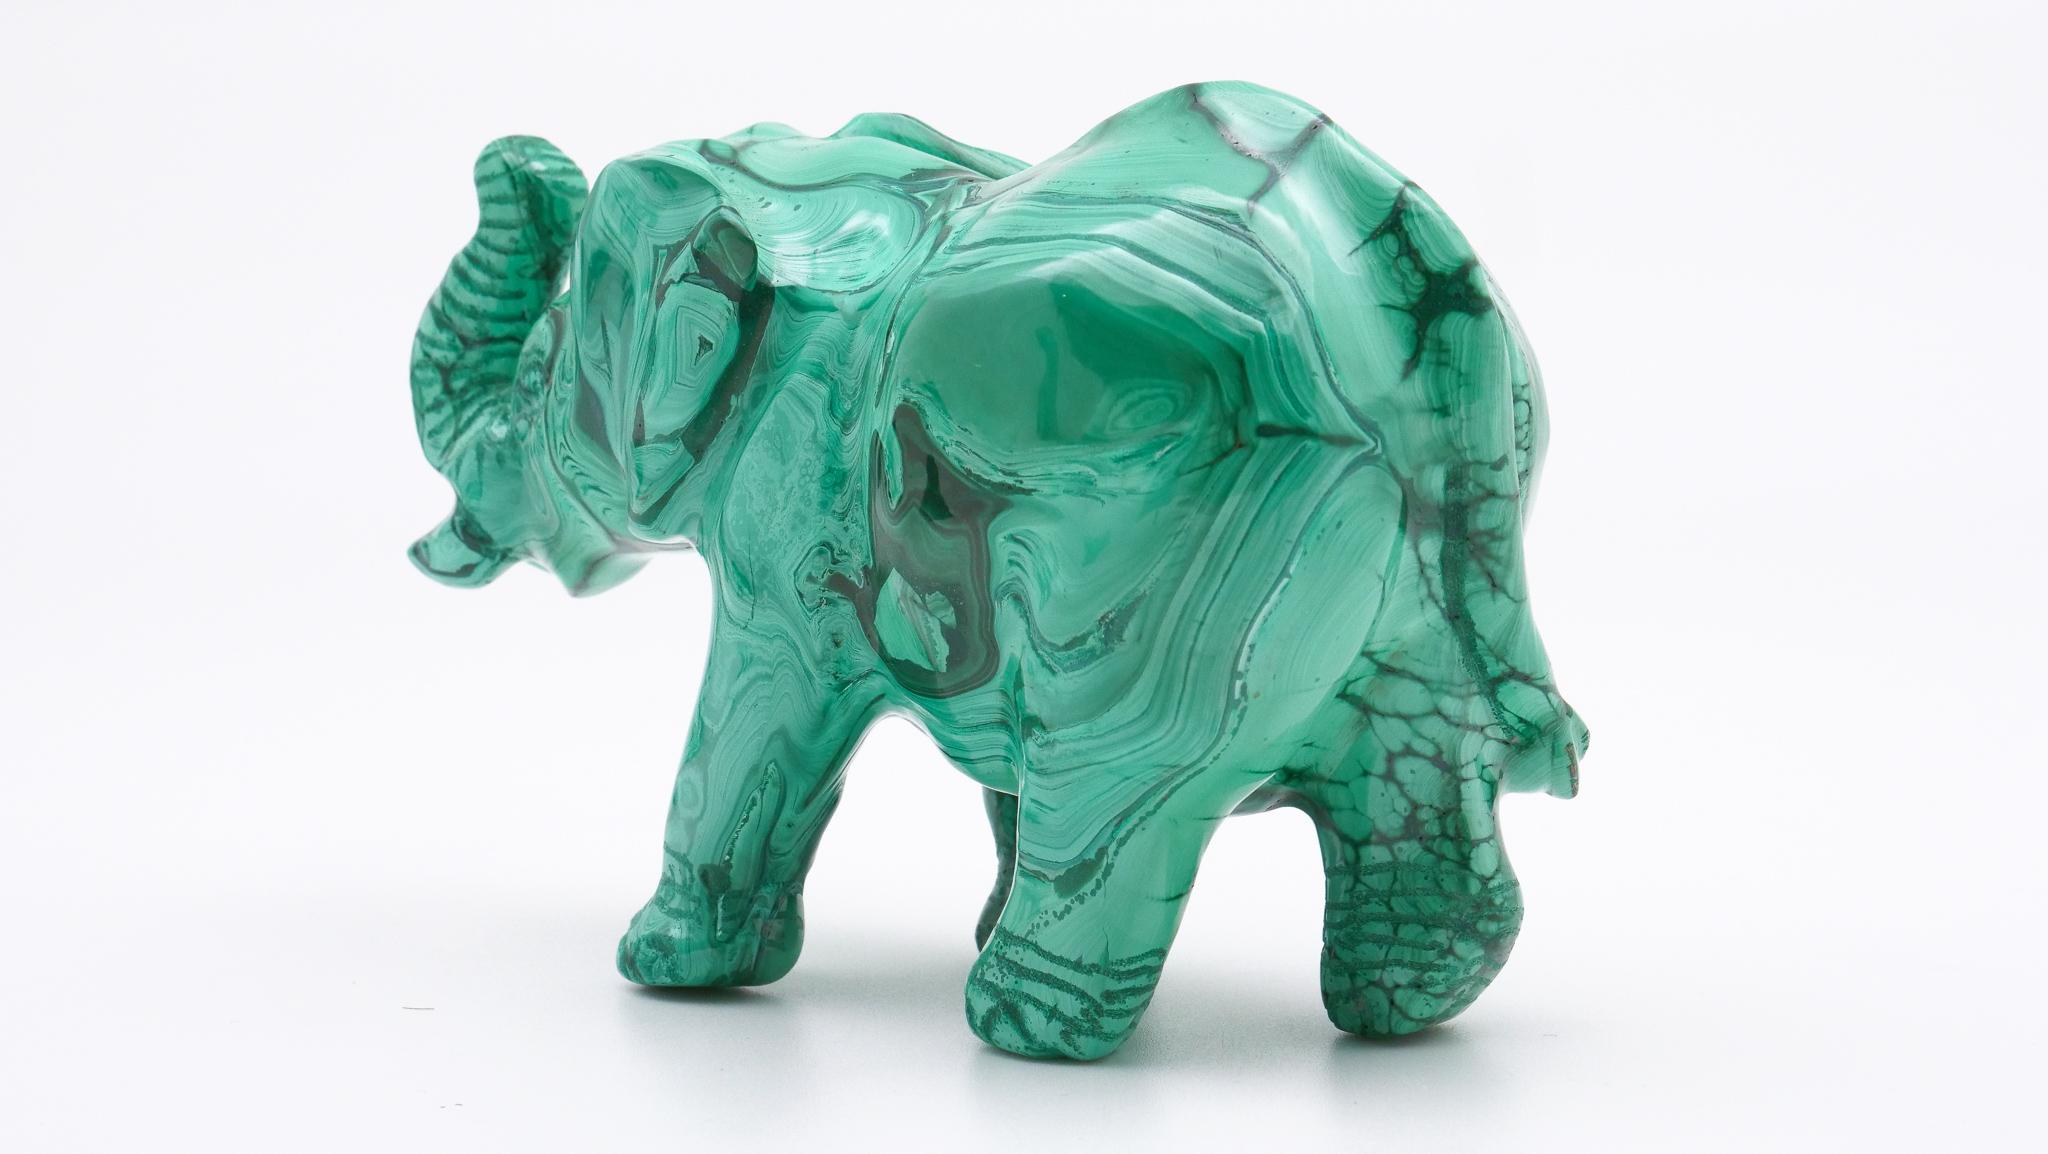 The malachite for this carving was sourced from the Congo where the finest quality of this mineral is currently found. Malachite from the 18th-19th century was also sourced from Russia. Carvings, such as this, were typically brought back from Europe